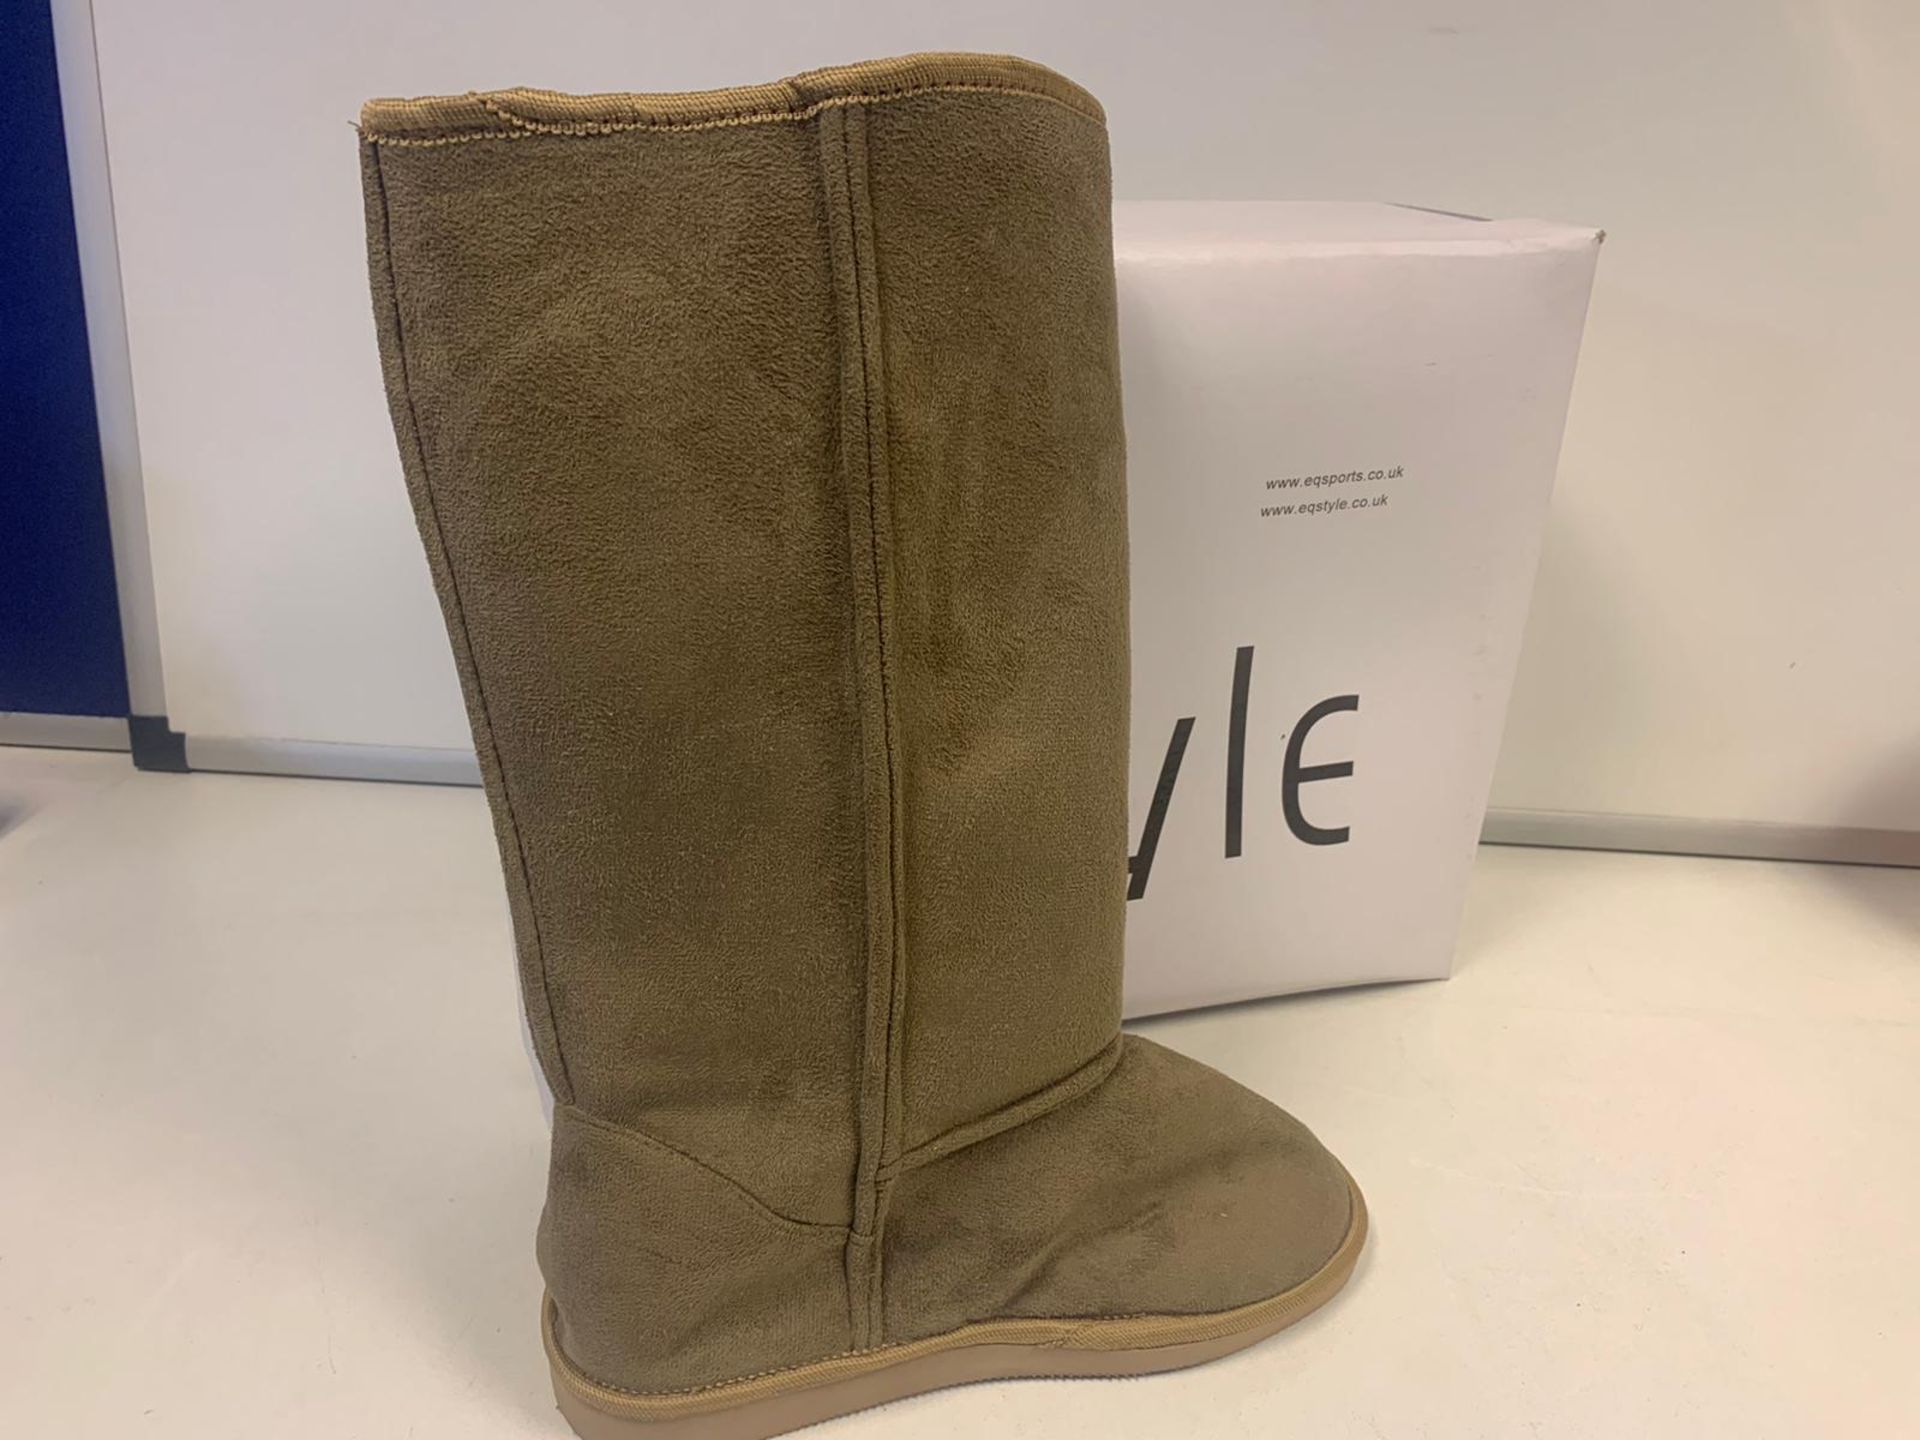 20 X BRAND NEW BOXED EQ STYLE WINTER BOOTS CAMEL SIZE 6 IN 2 BOXES